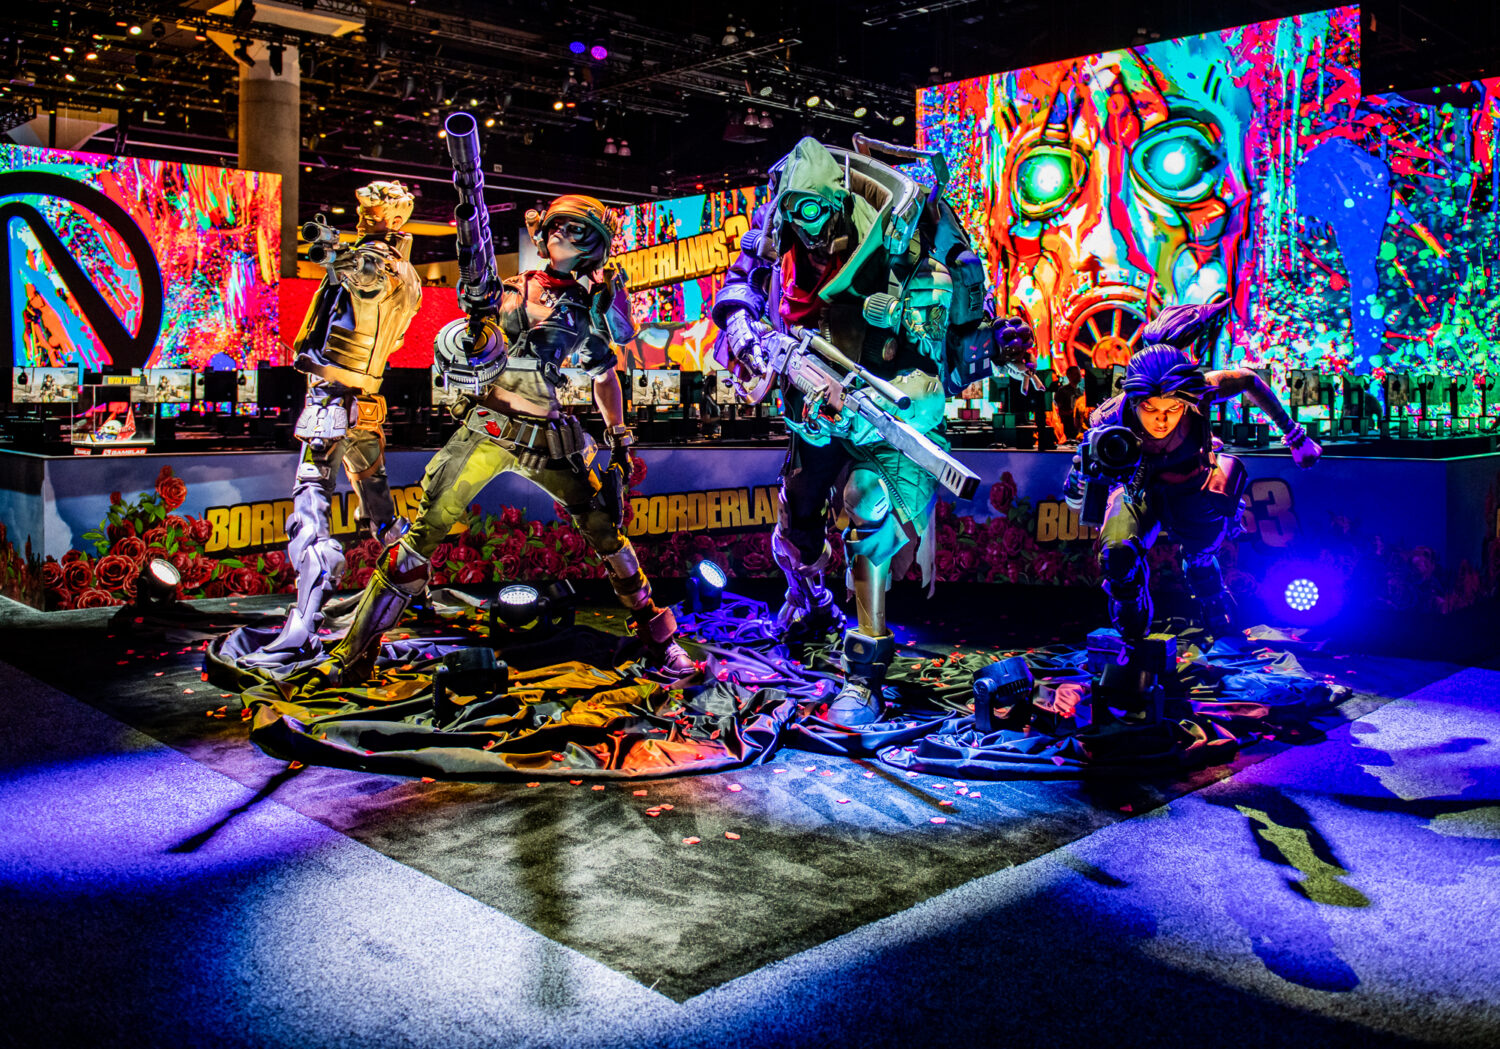 Image of LED panels at Borderlands display at E3 Electronic Entertainment Expo 2023